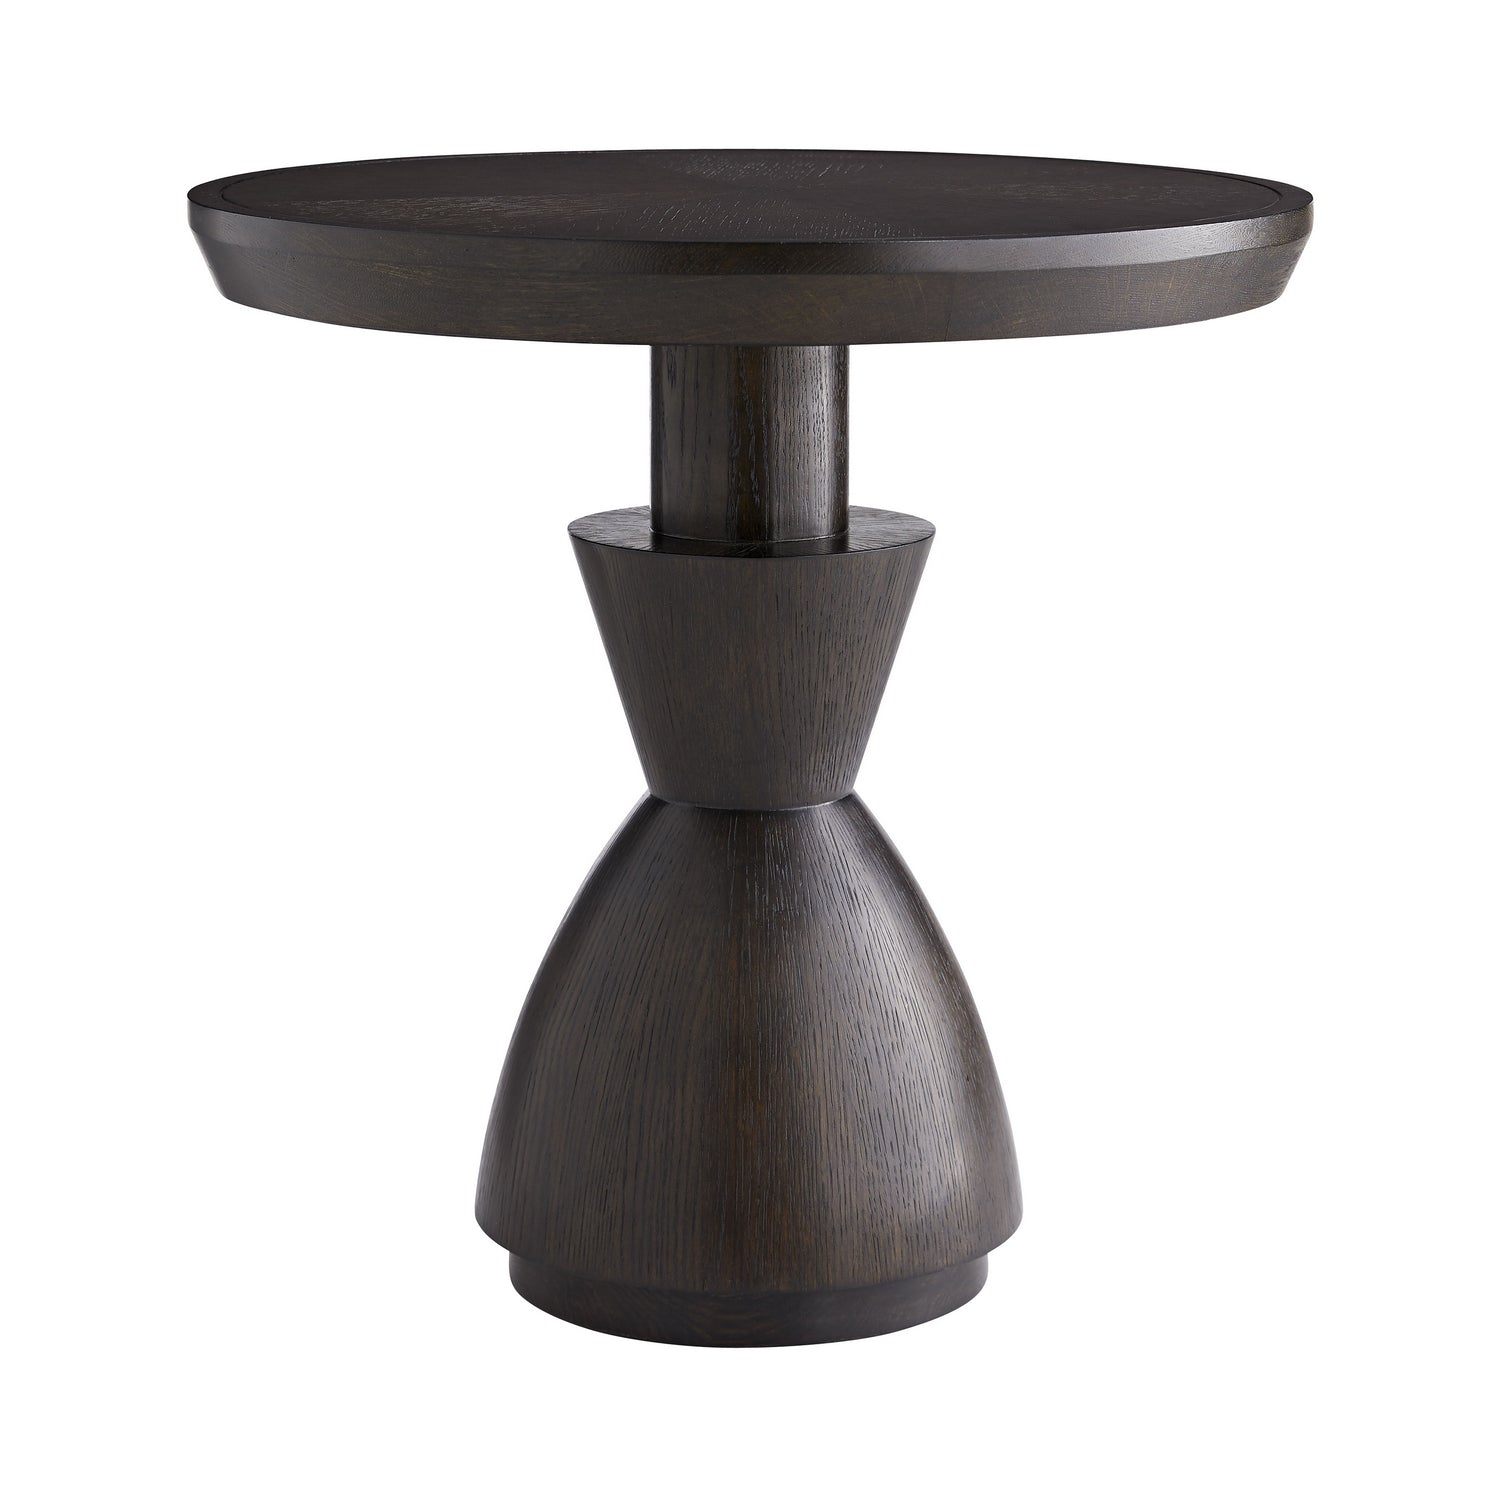 End Table from the Mahoun collection in Umber finish